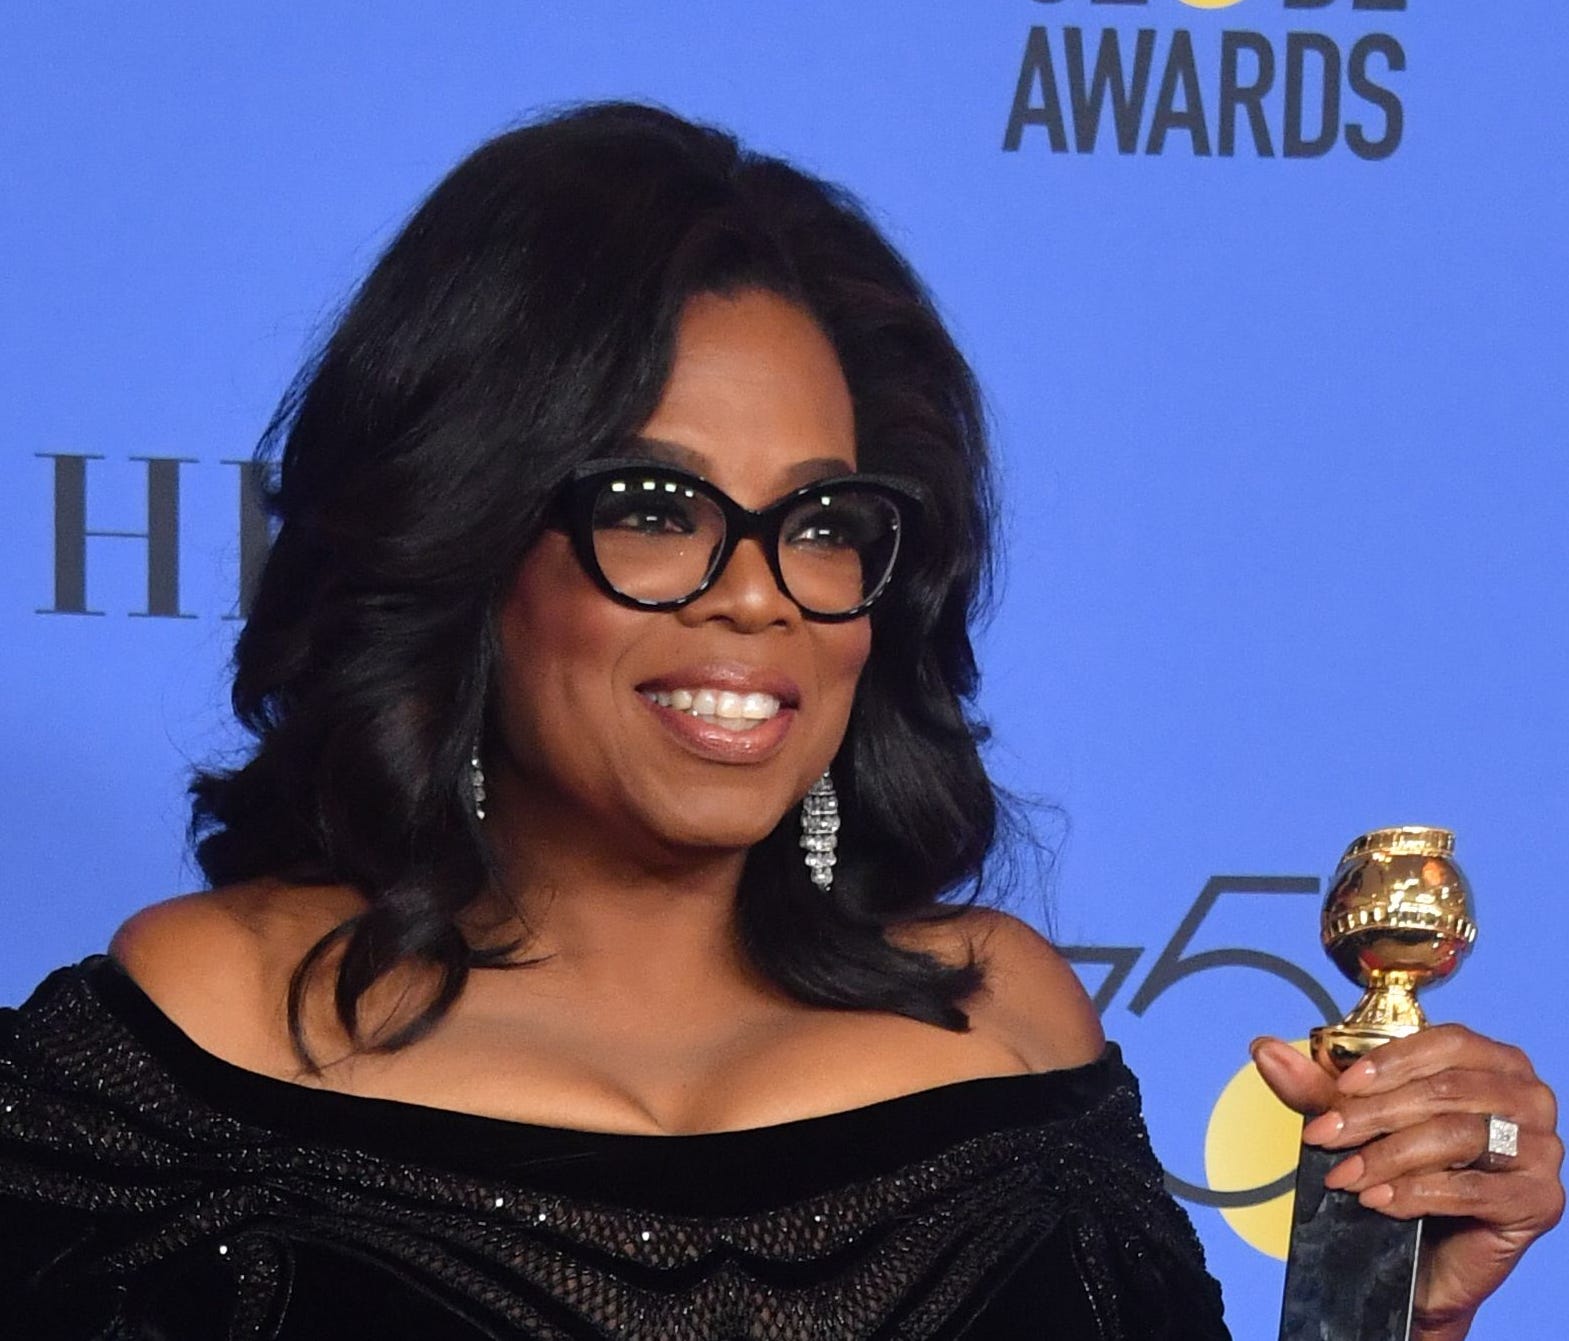 Actress and TV talk show host Oprah Winfrey accepted the Cecil B. DeMille Award during the 75th Golden Globe Awards in Beverly Hills, Calif., on Jan. 7, 2018.